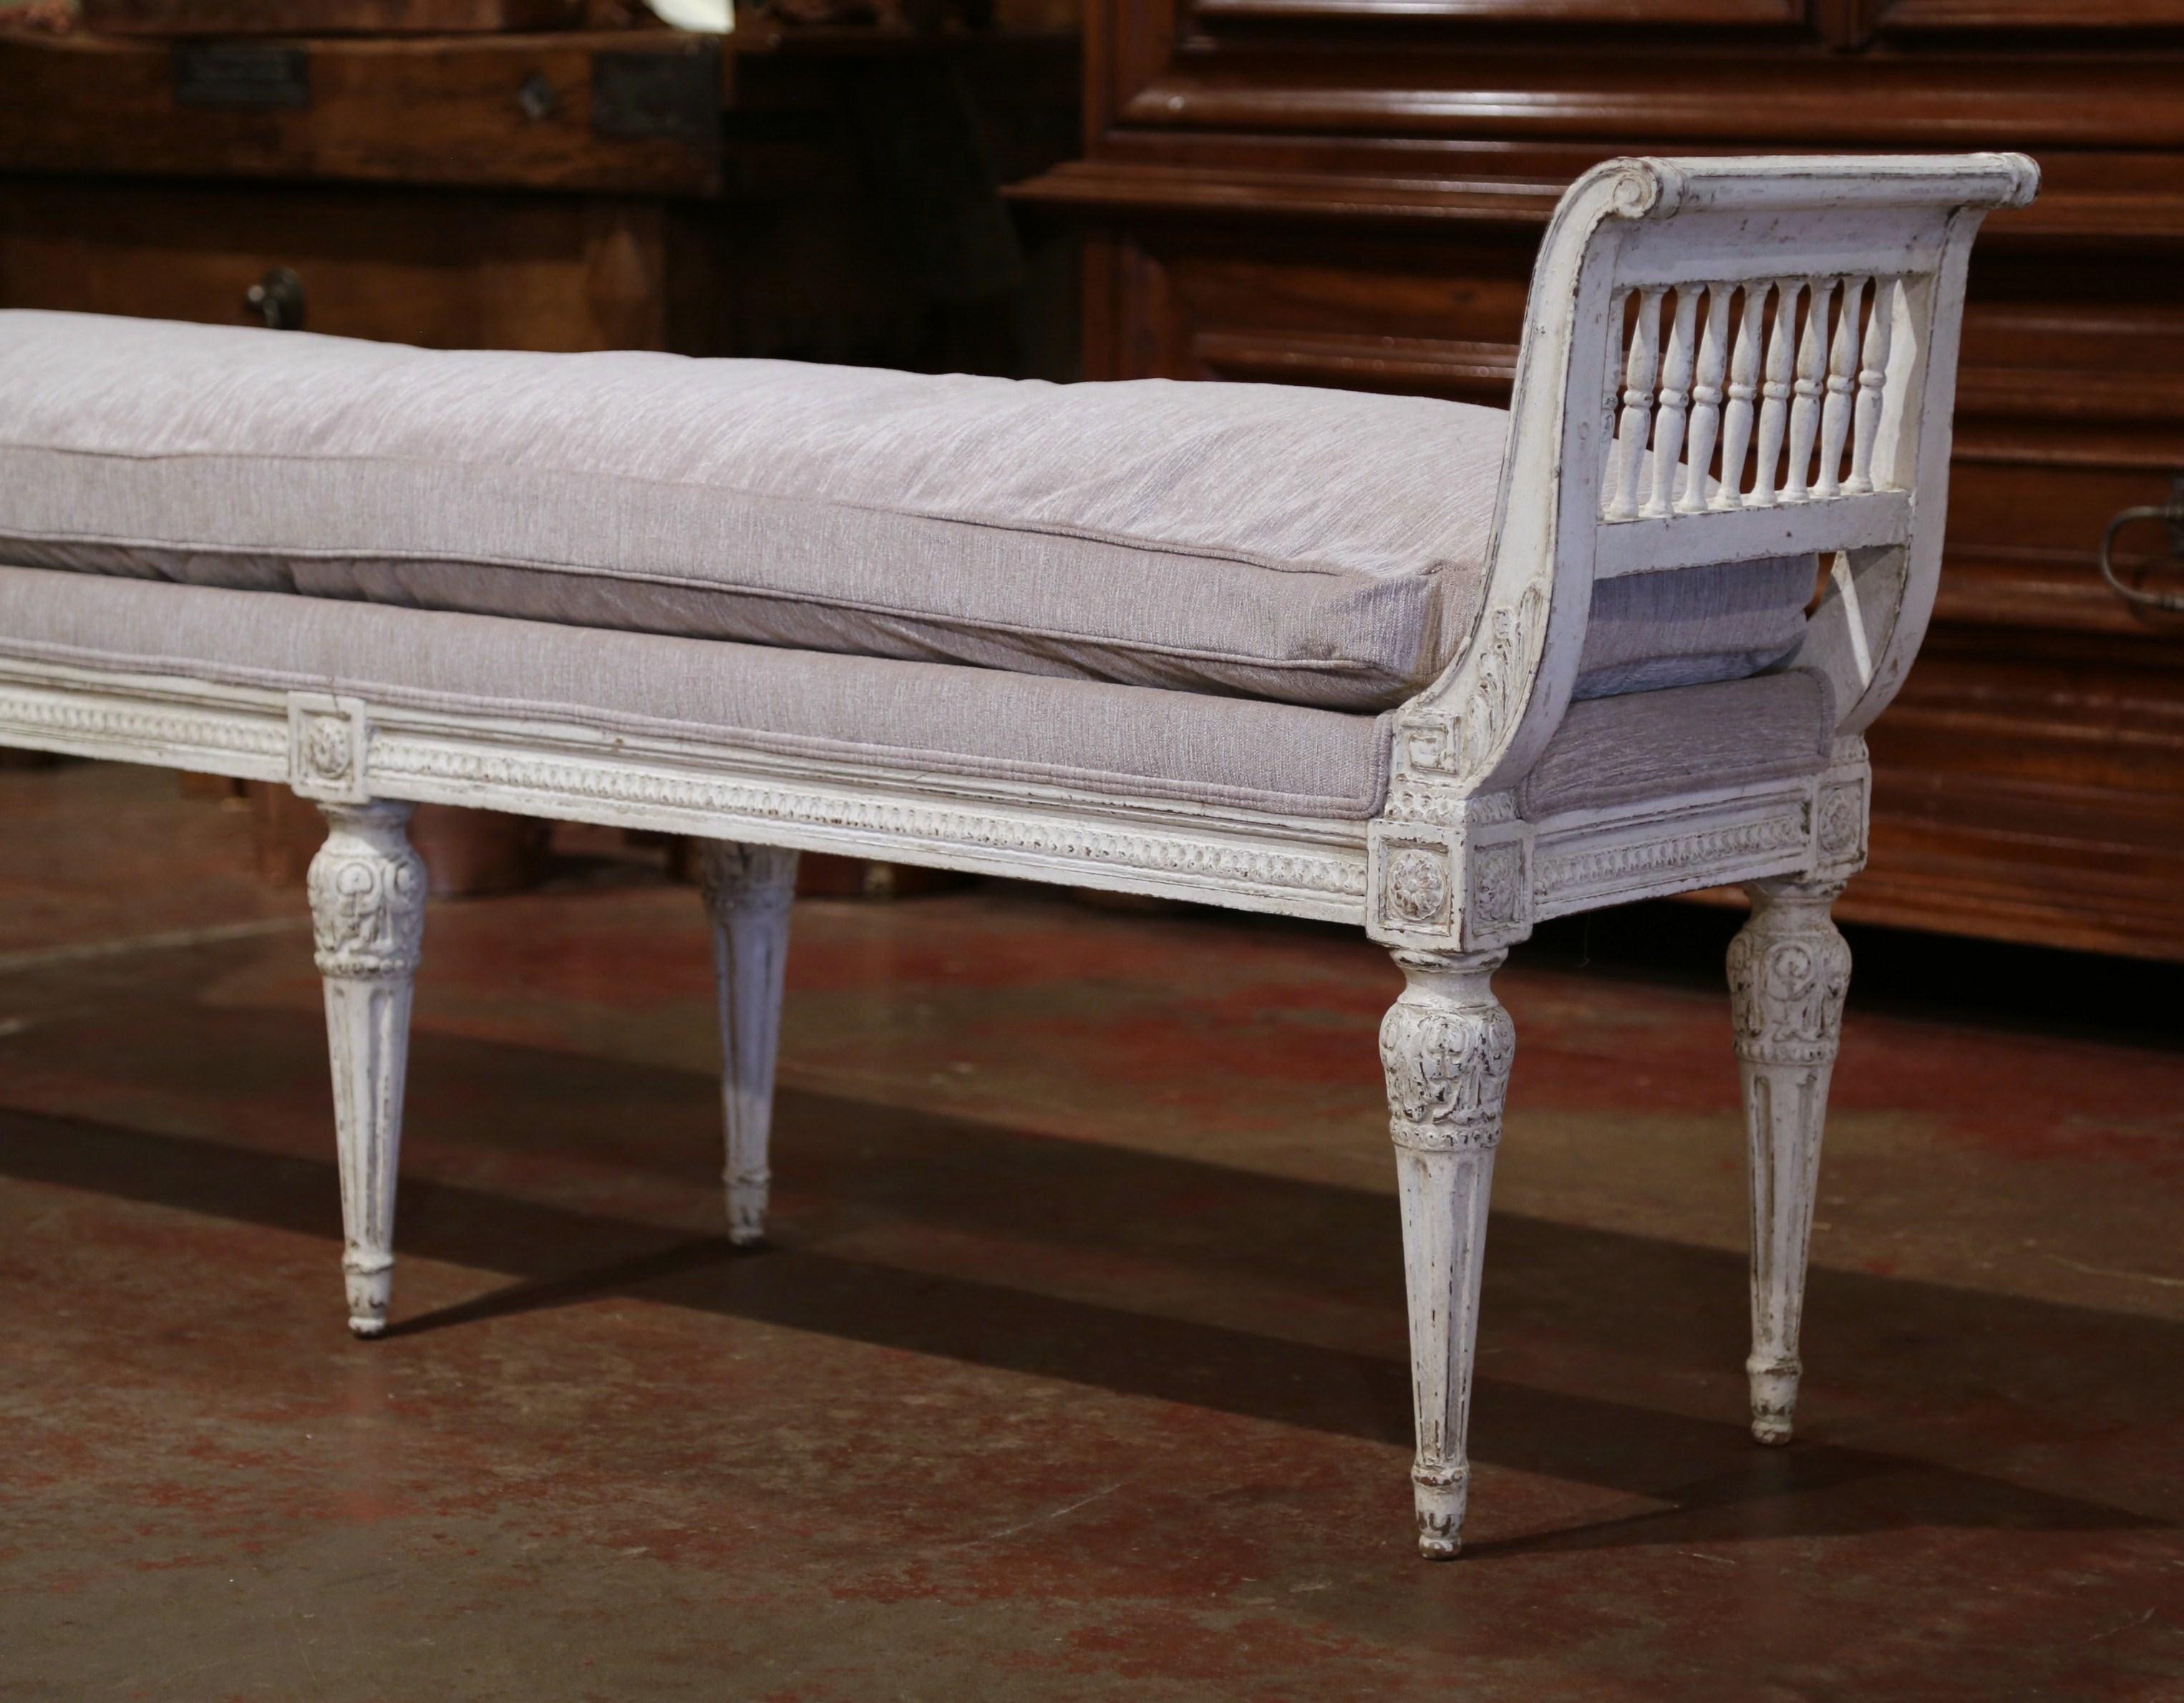 Hand-Carved 19th Century French Directoire Carved Painted Banquette with Back and Upholstery